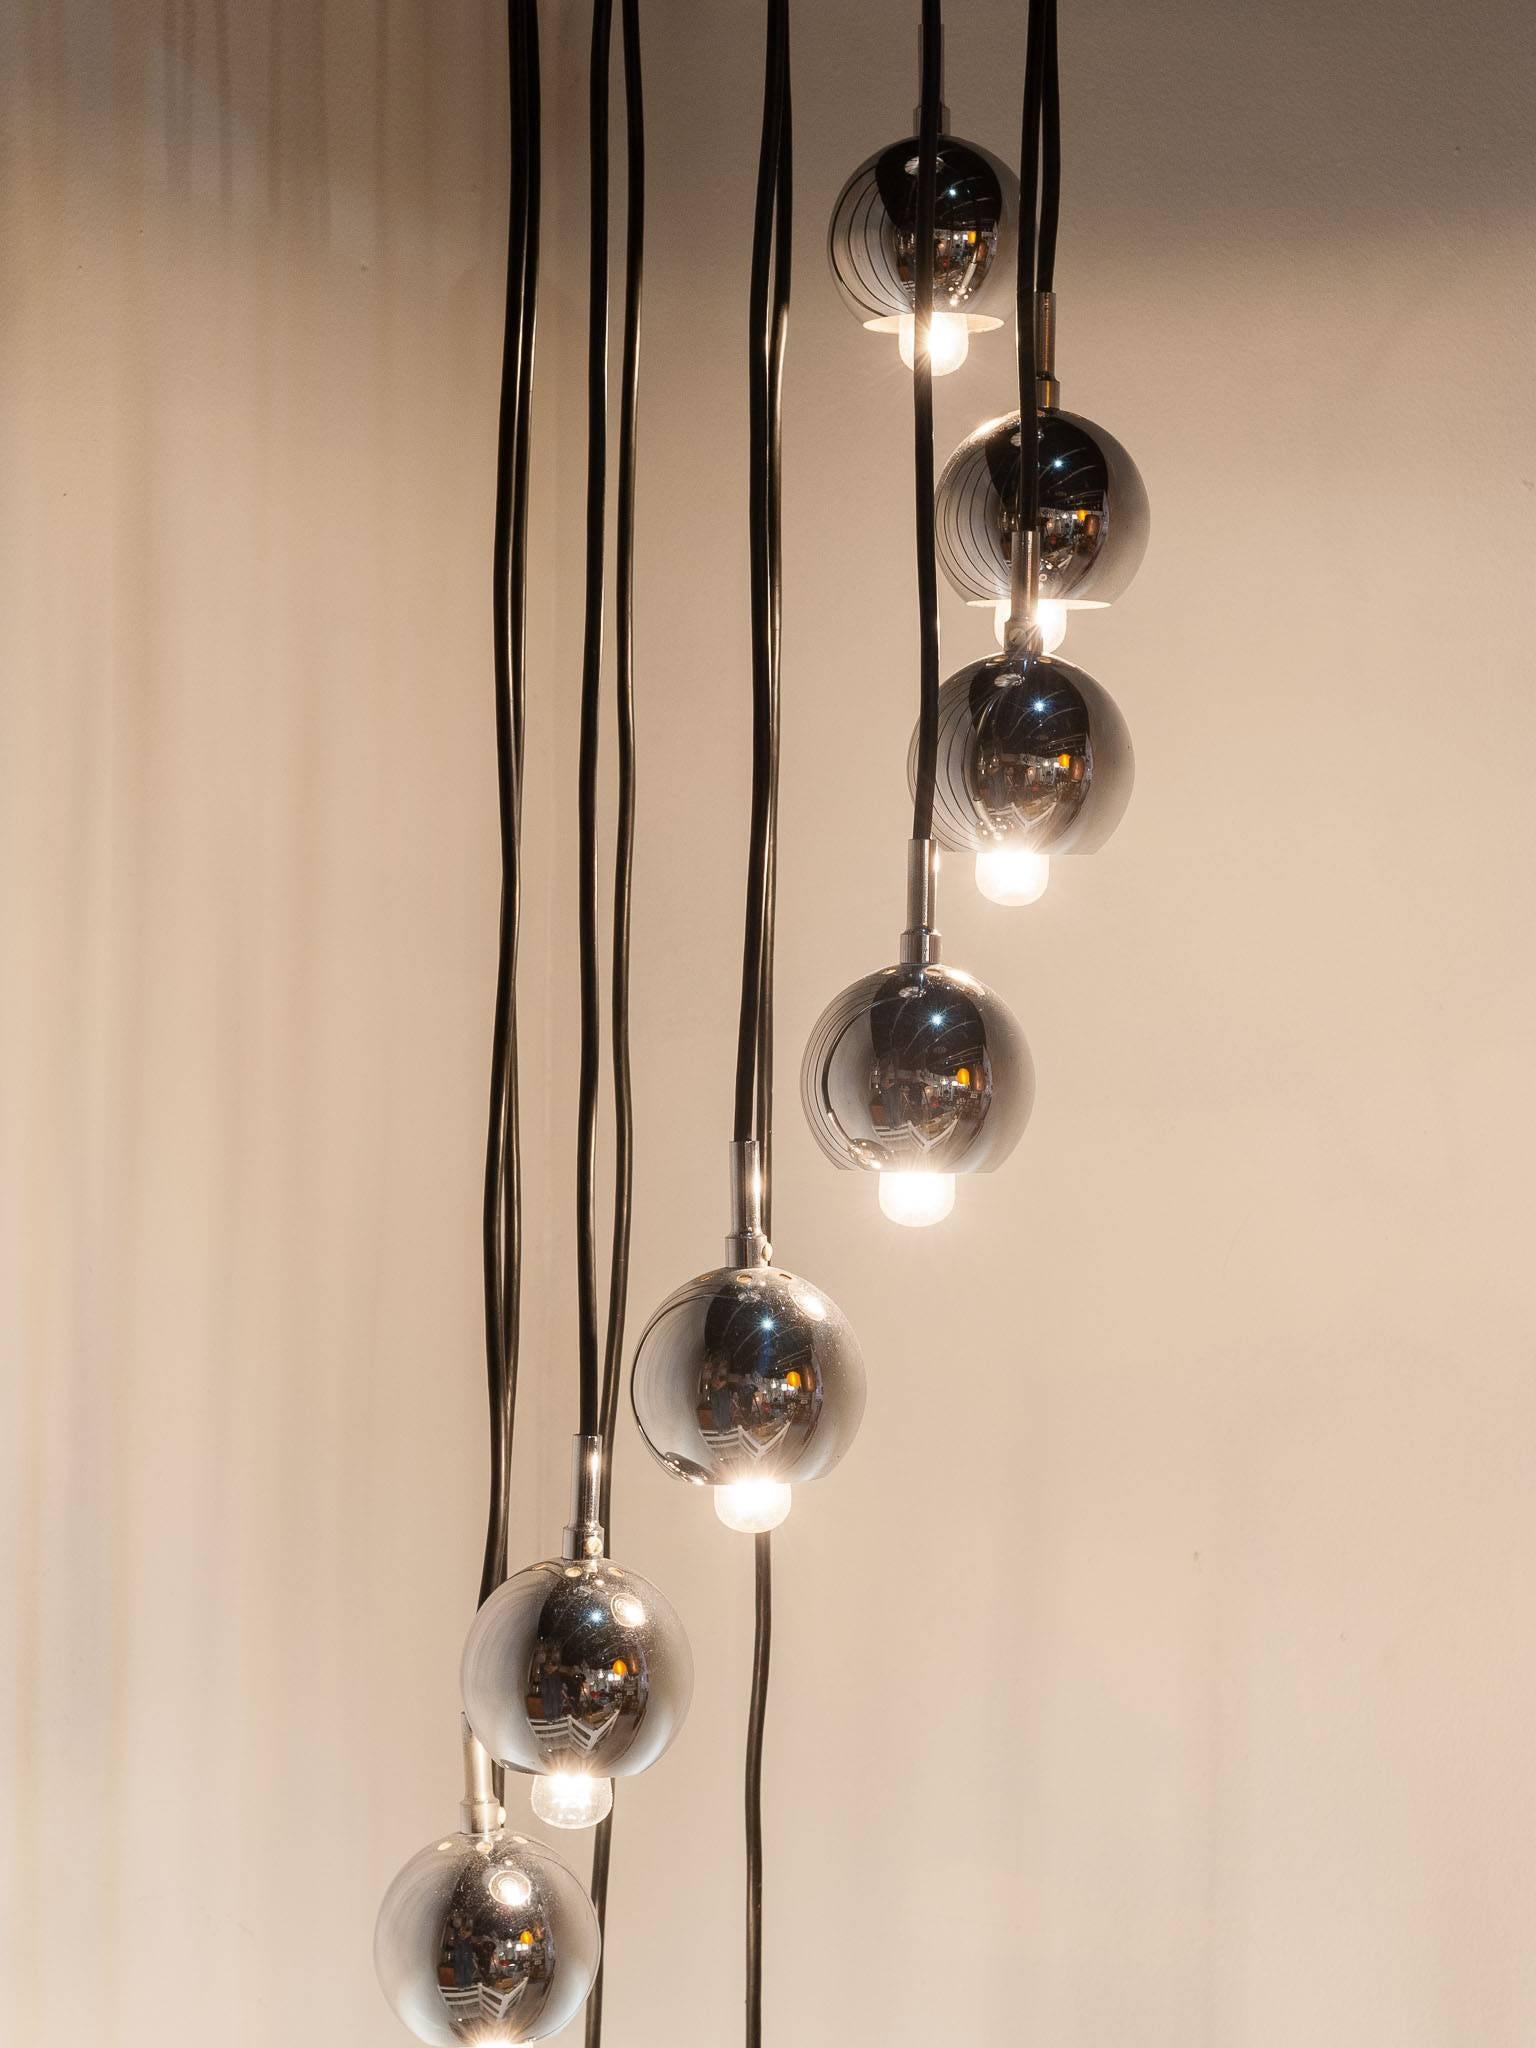 1960s ten chrome globe hanging light each one lower forming a long flowing spiral. Each globe hangs from a black flex and is 9cms in diameter. Perfect for a living room with a high ceiling or above a dining table or hallway. The wires are hidden